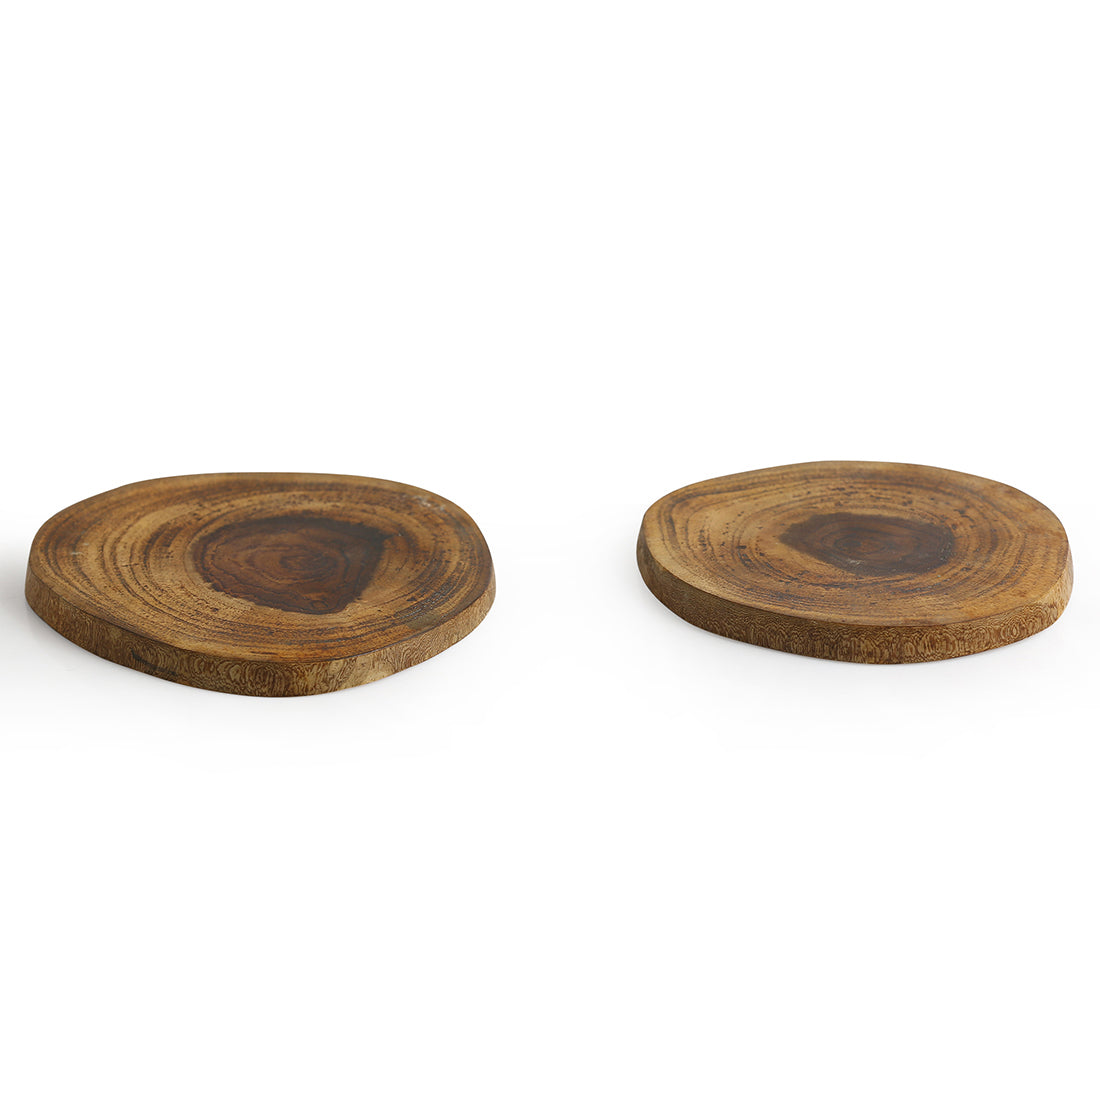 'Circles of Wood' Log Handcrafted Coasters In Mango Wood (Set Of 6)